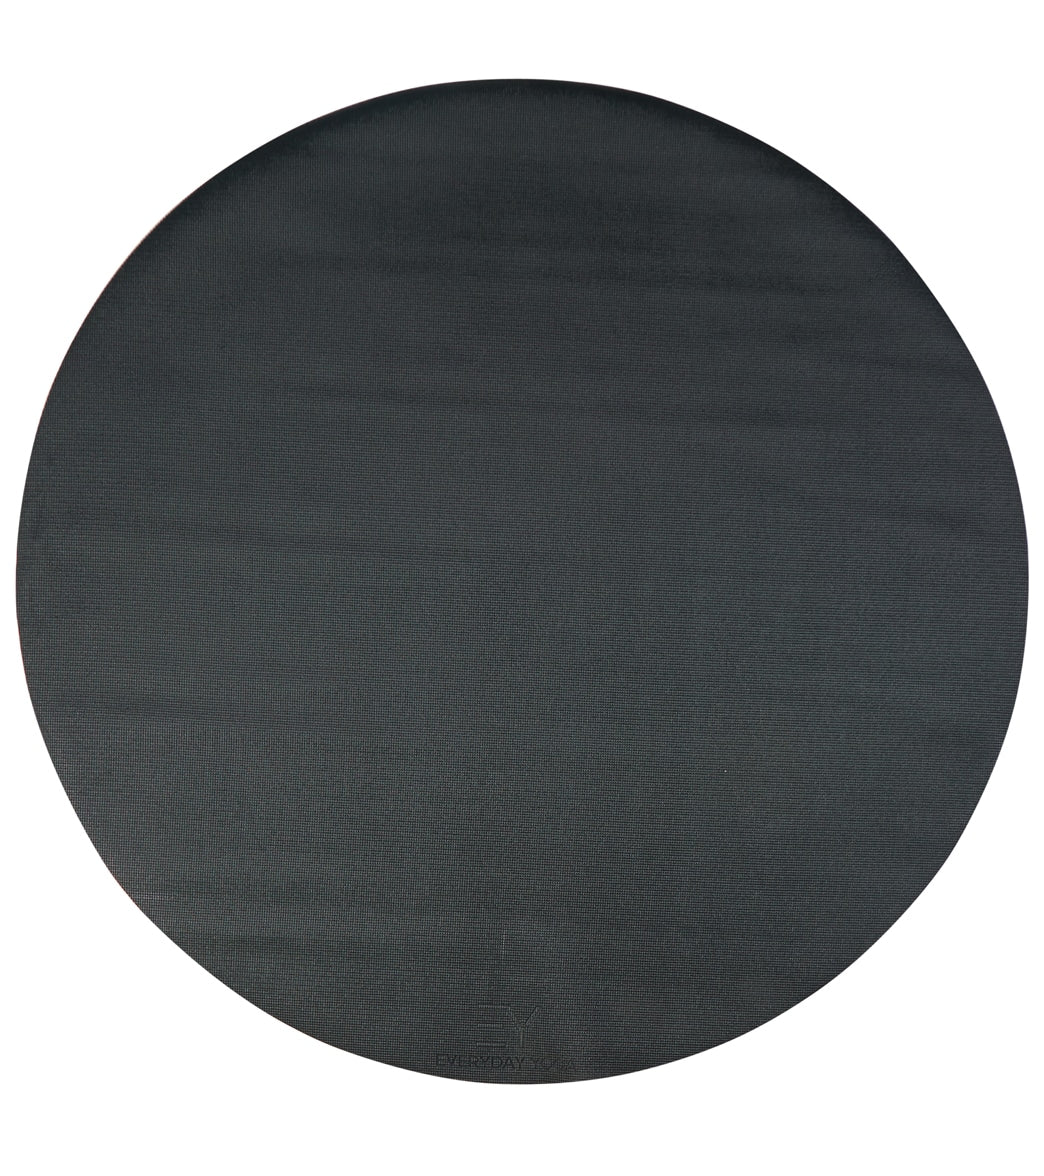 Everyday Yoga Round Yoga Mat 6' diameter 5mm at YogaOutlet